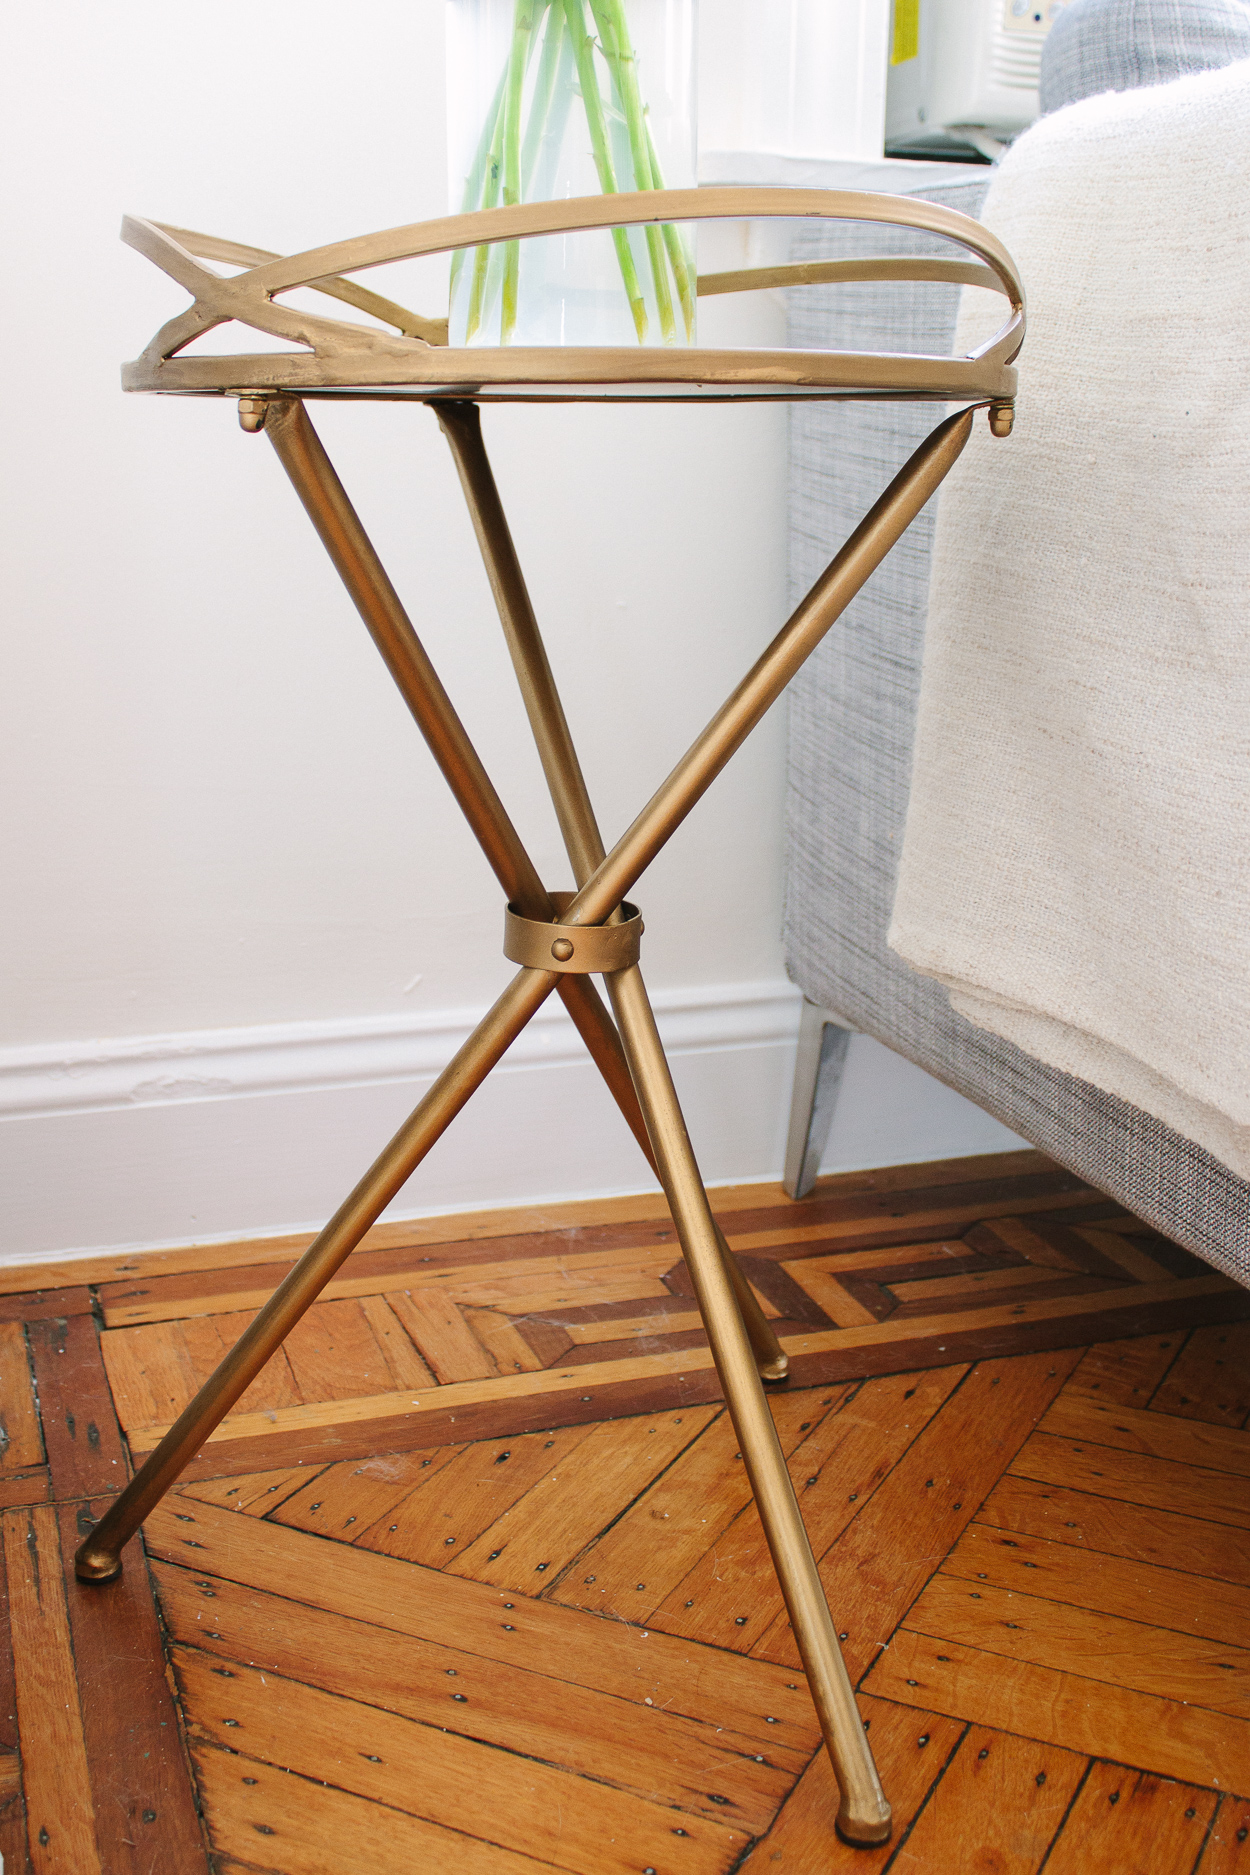 affordable end tables, affordable side tables, hayneedle, gold end table, stylish end tables, gold side table